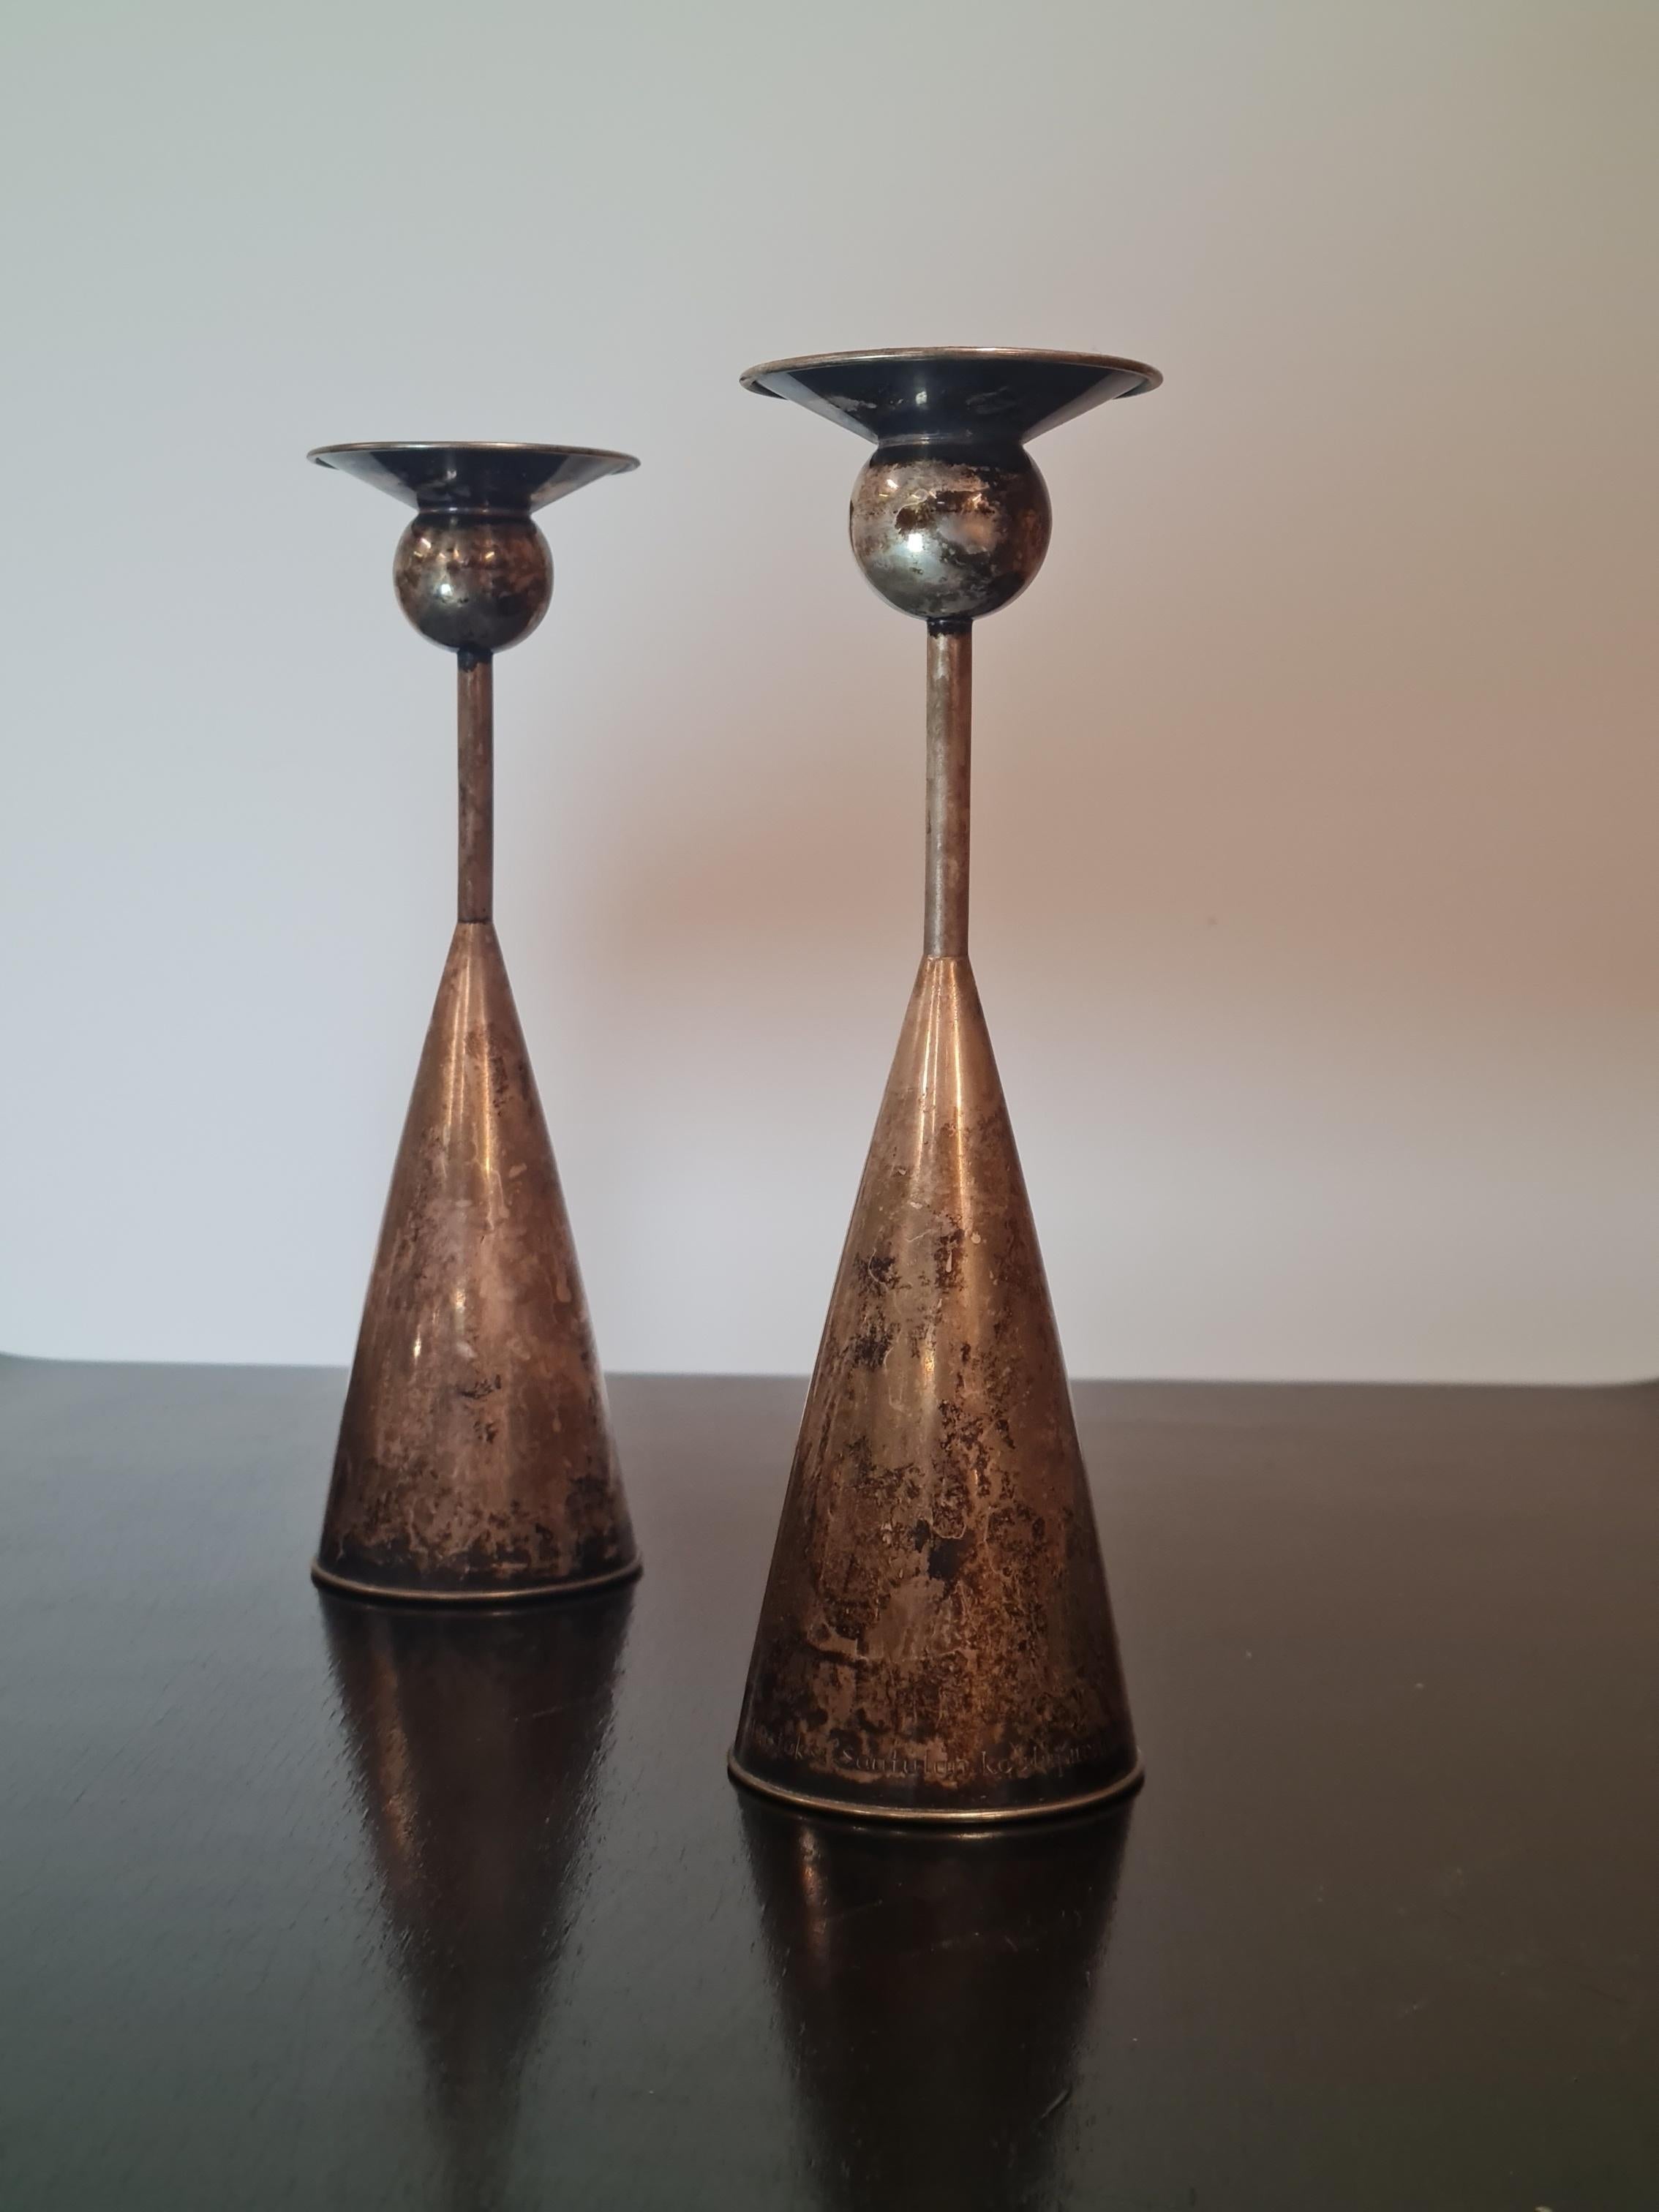 Pair of elegant candle holders desgined by Kai Blomqvist and manufactured by Kultakeskus Oy back in 1965. Both pieces have a series of markings and stamps, which indicate both of them to be solid silver, manufactured by Kultakeskus Oy, and based on